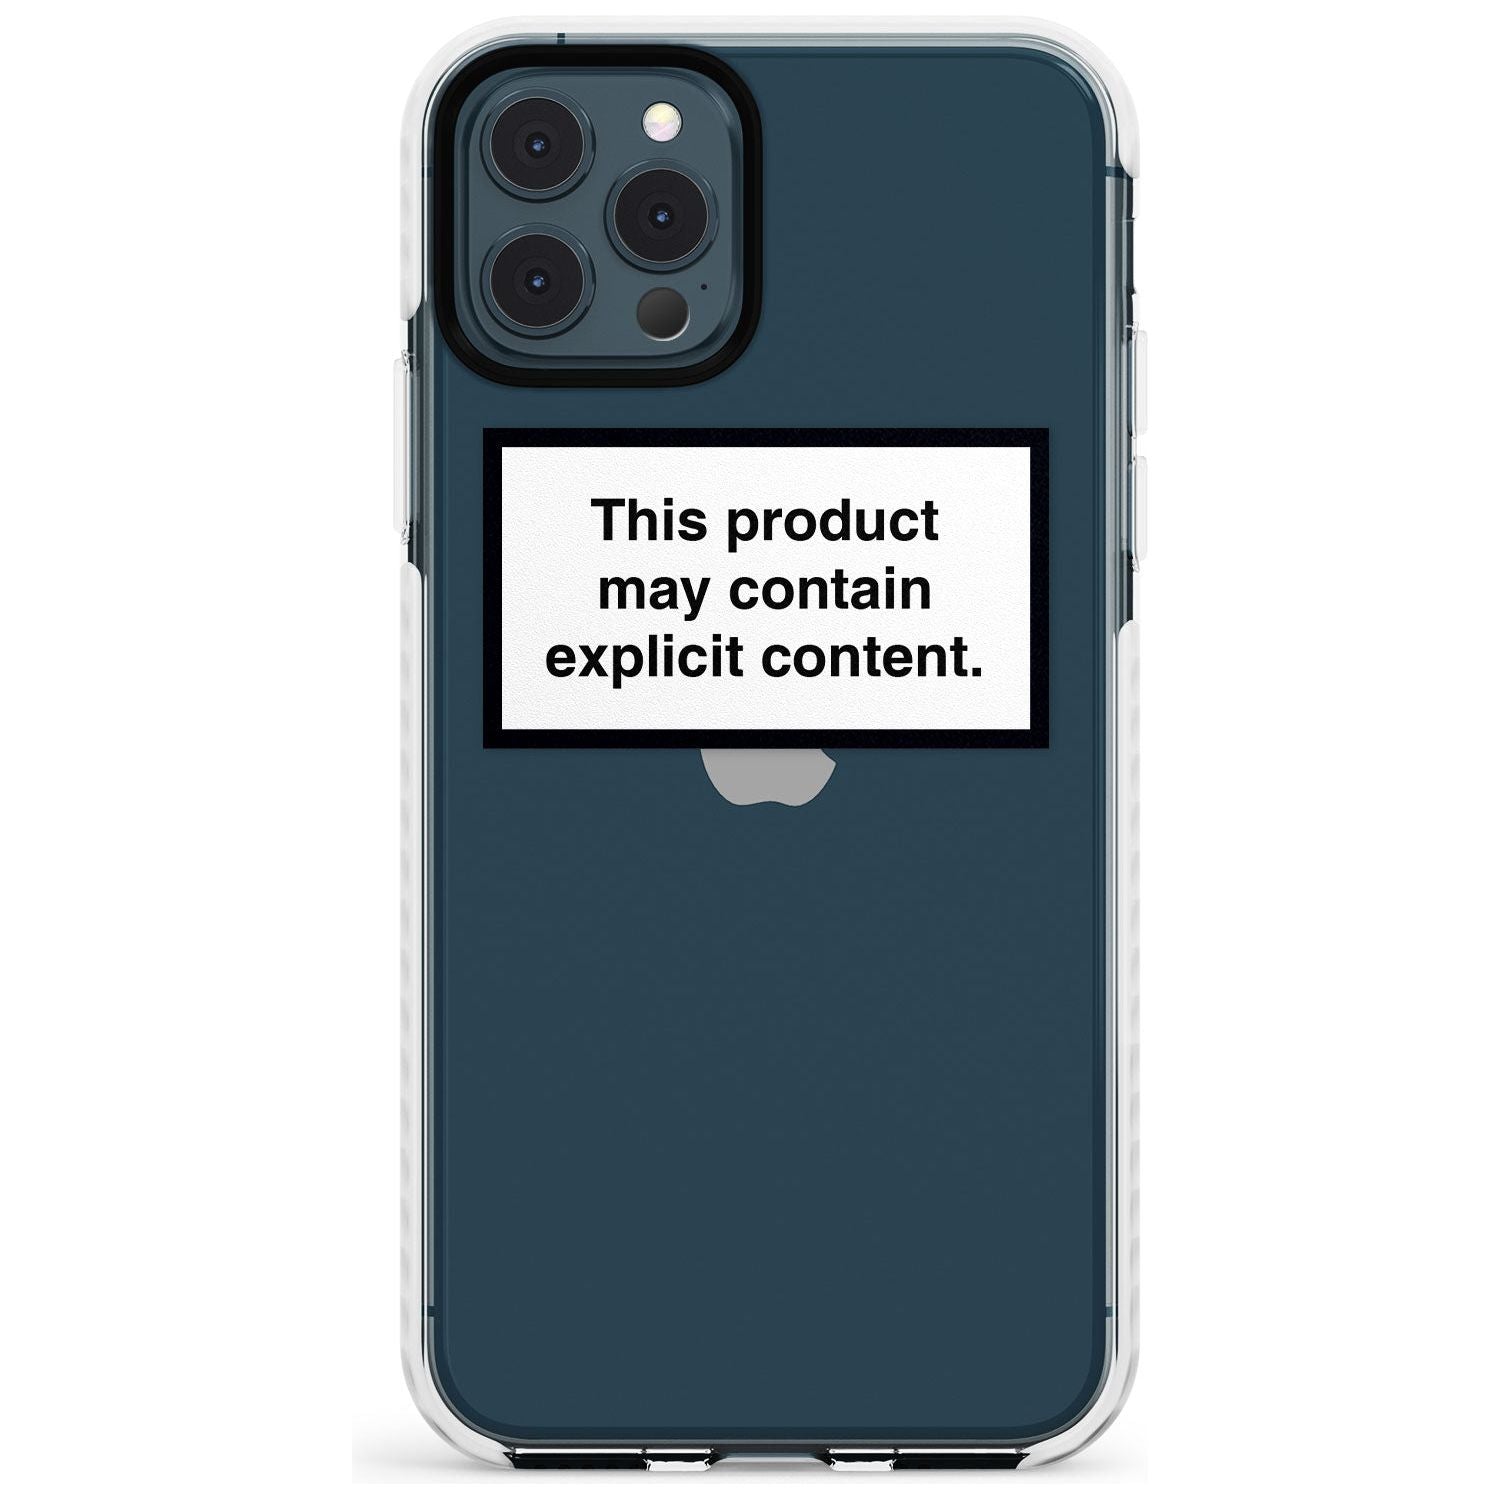 This product may contain explicit content Slim TPU Phone Case for iPhone 11 Pro Max